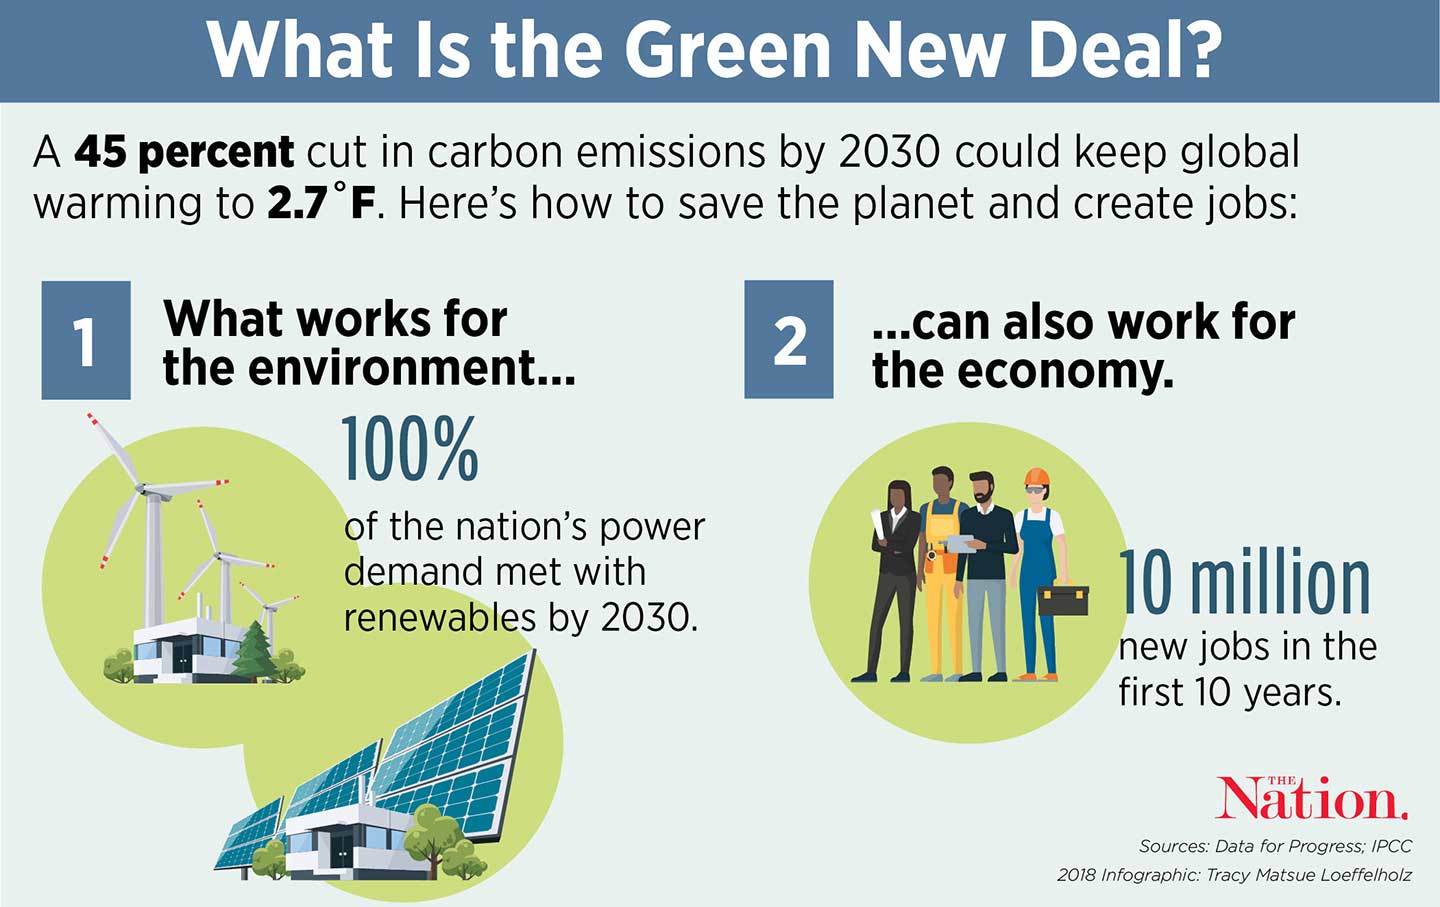 The Green New Deal Is Good for the the Democratic Party